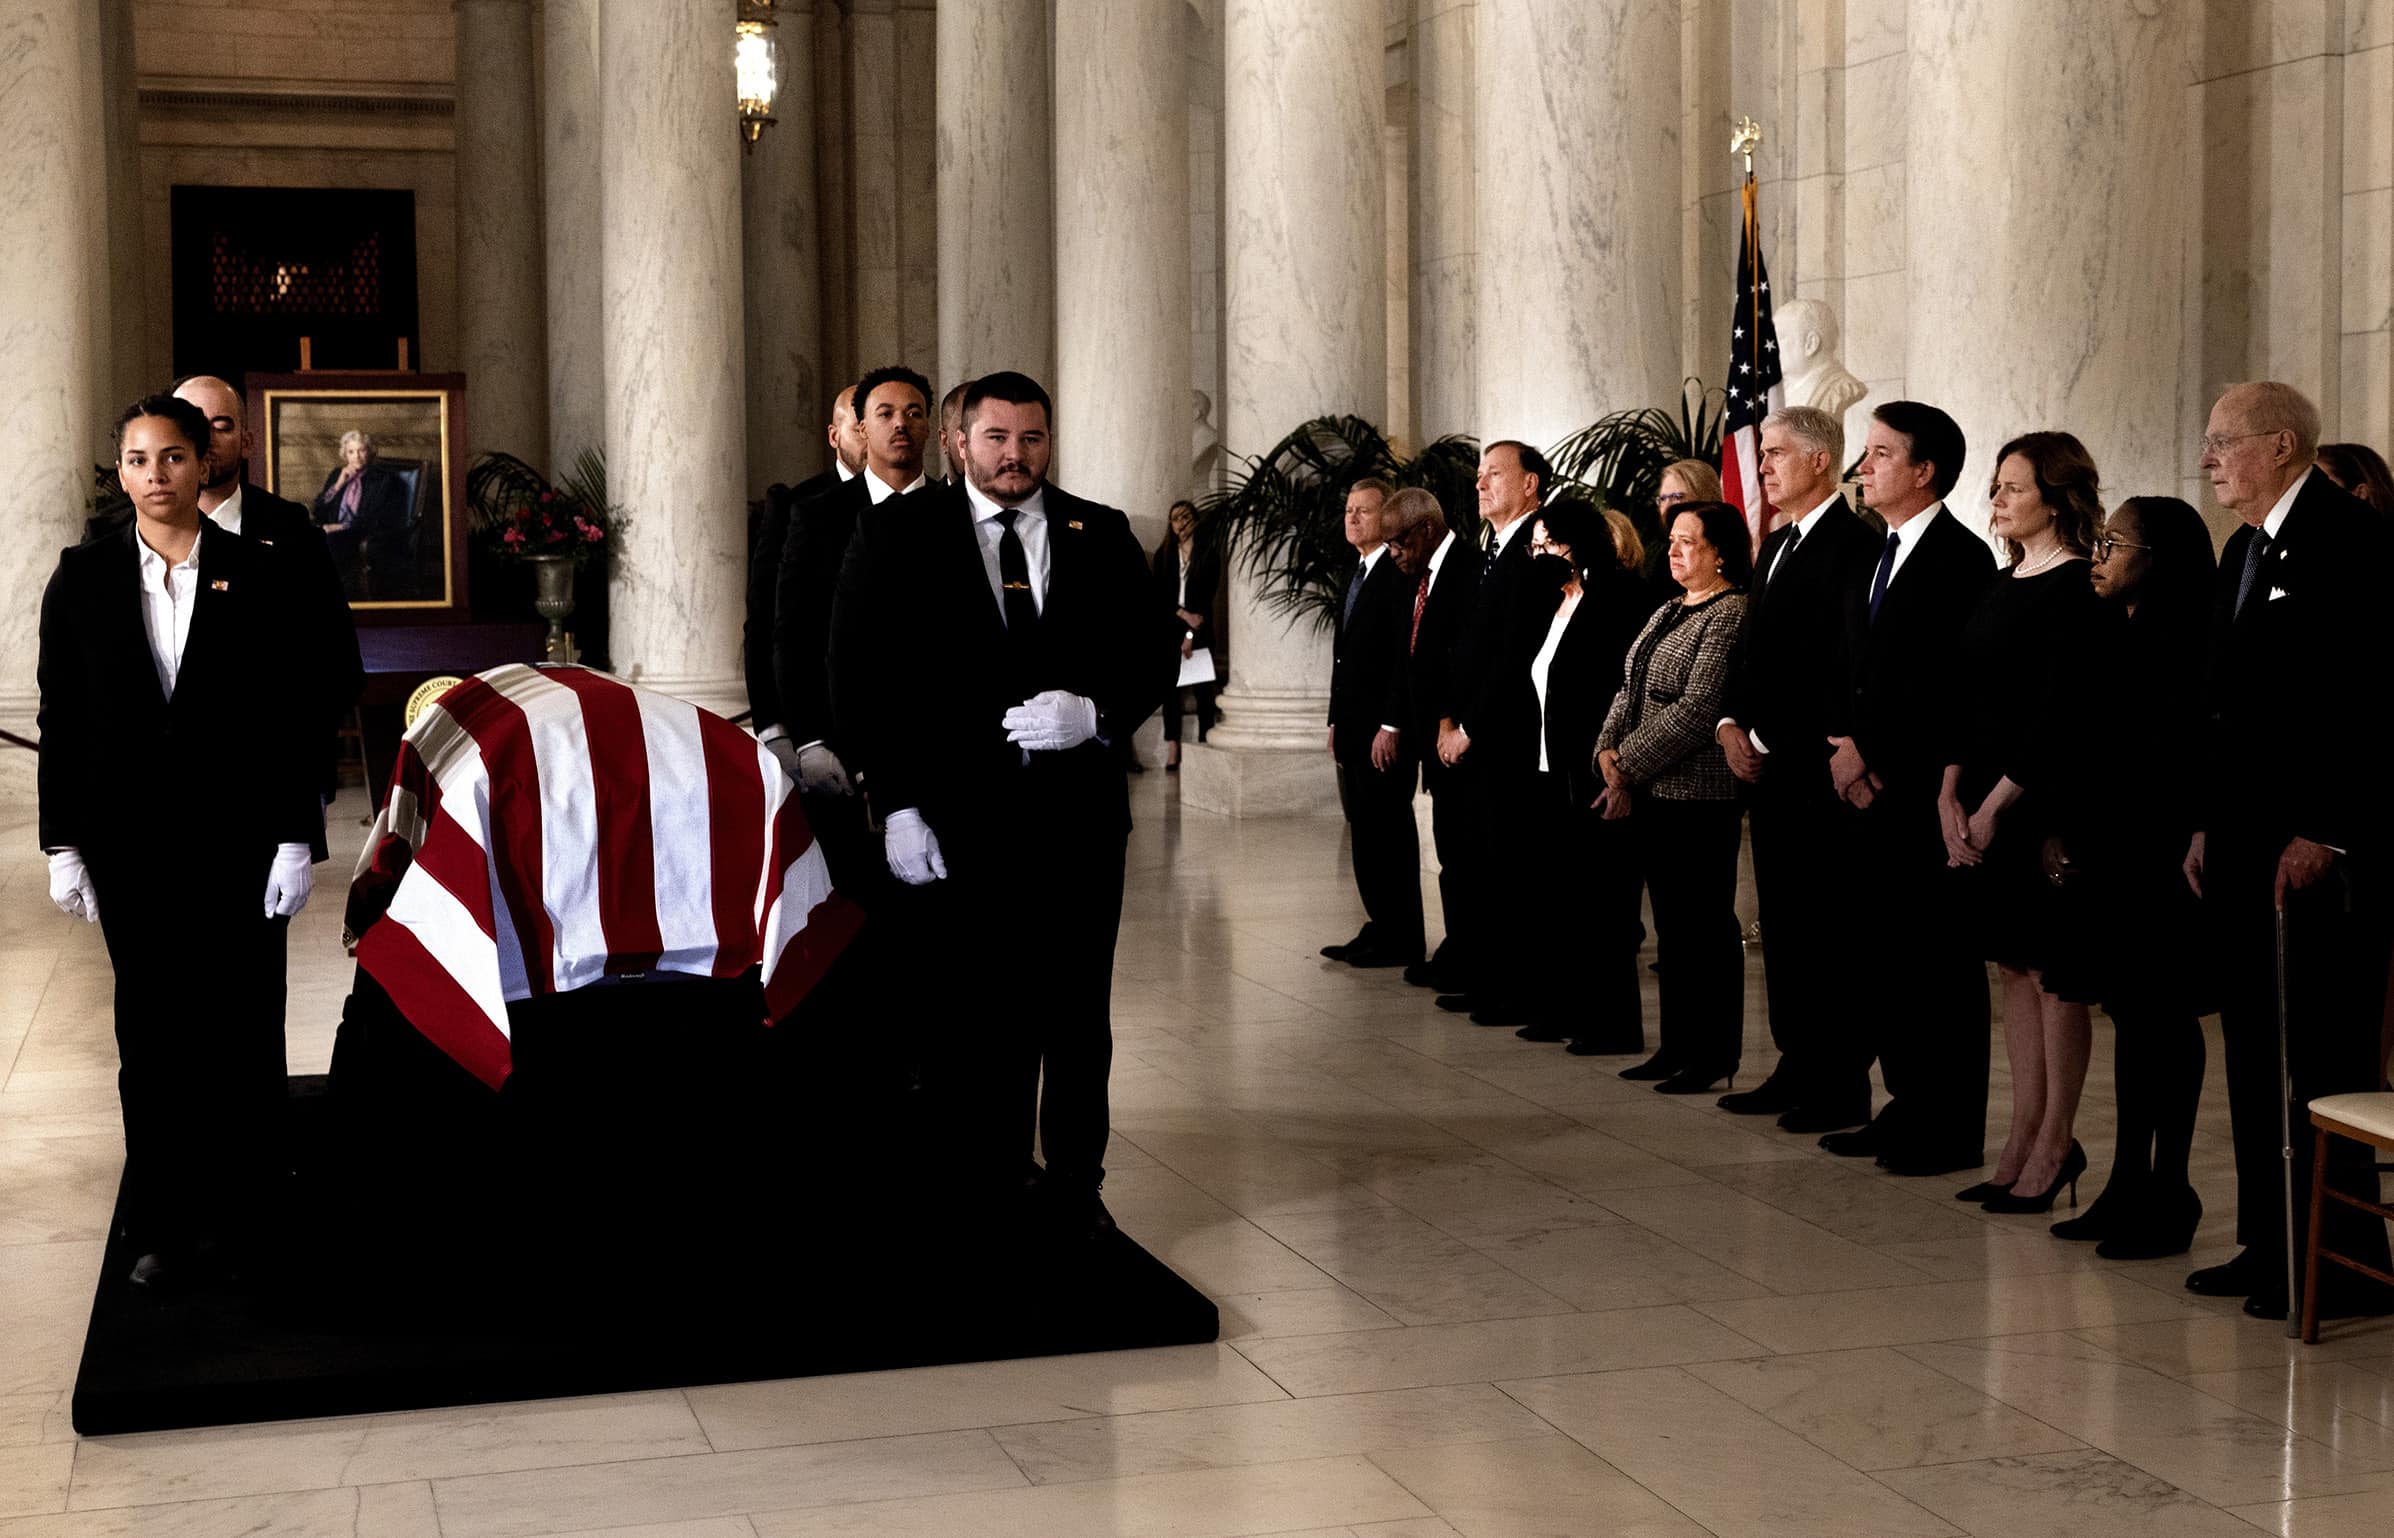 The casket of Justice O’Connor in the Great Hall at the Supreme Court 